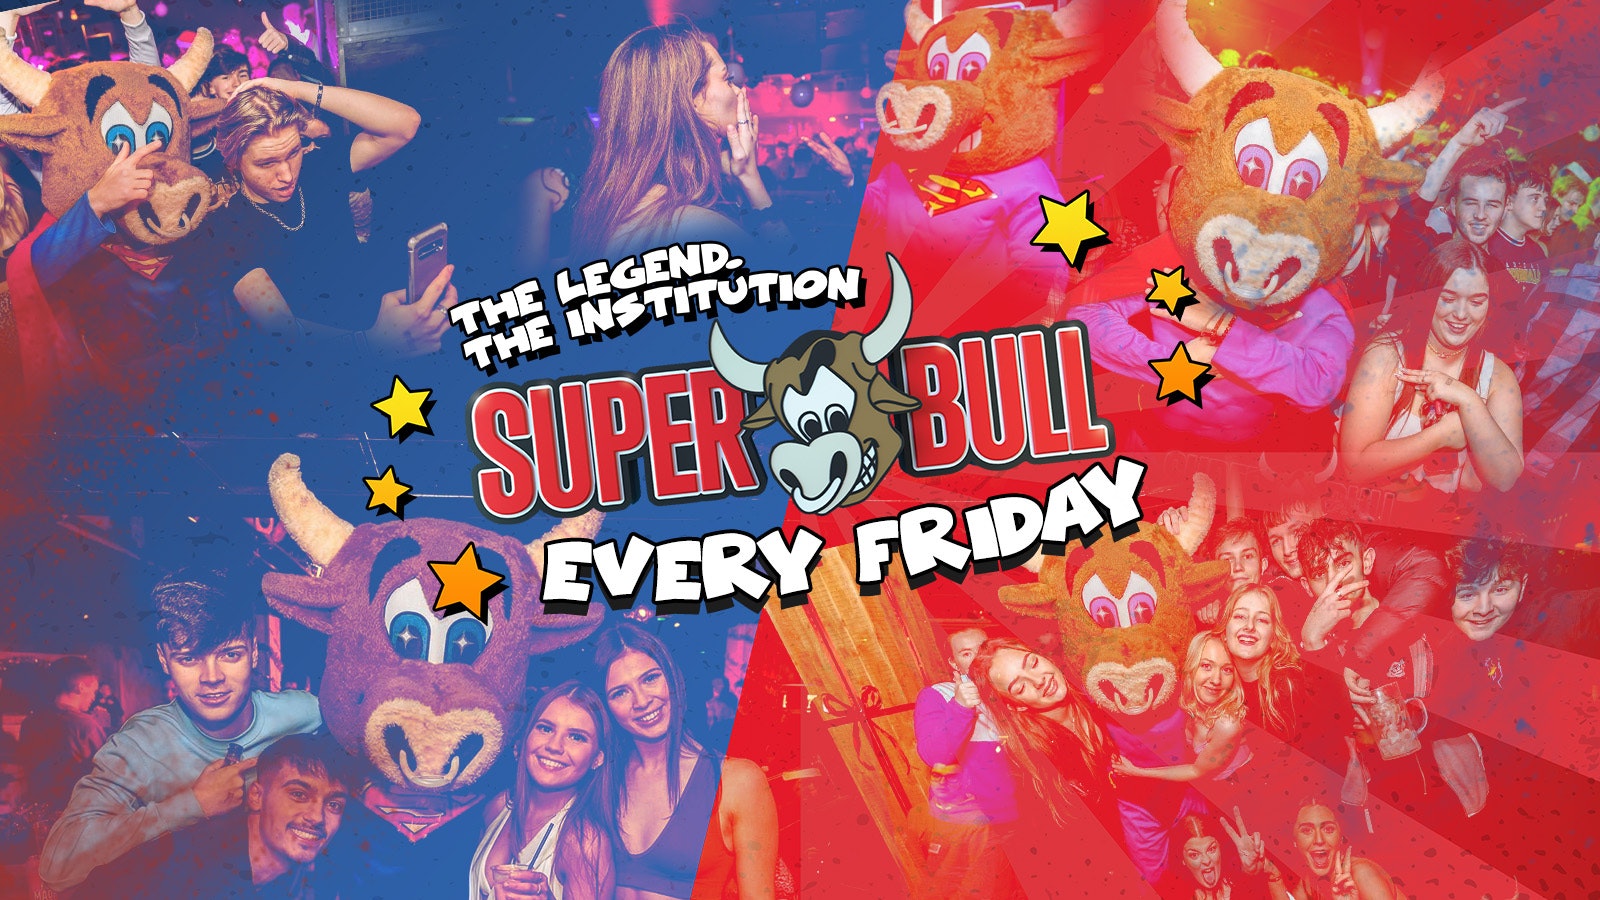 The Superbull – The Legend. The Institution – Fri 10th May